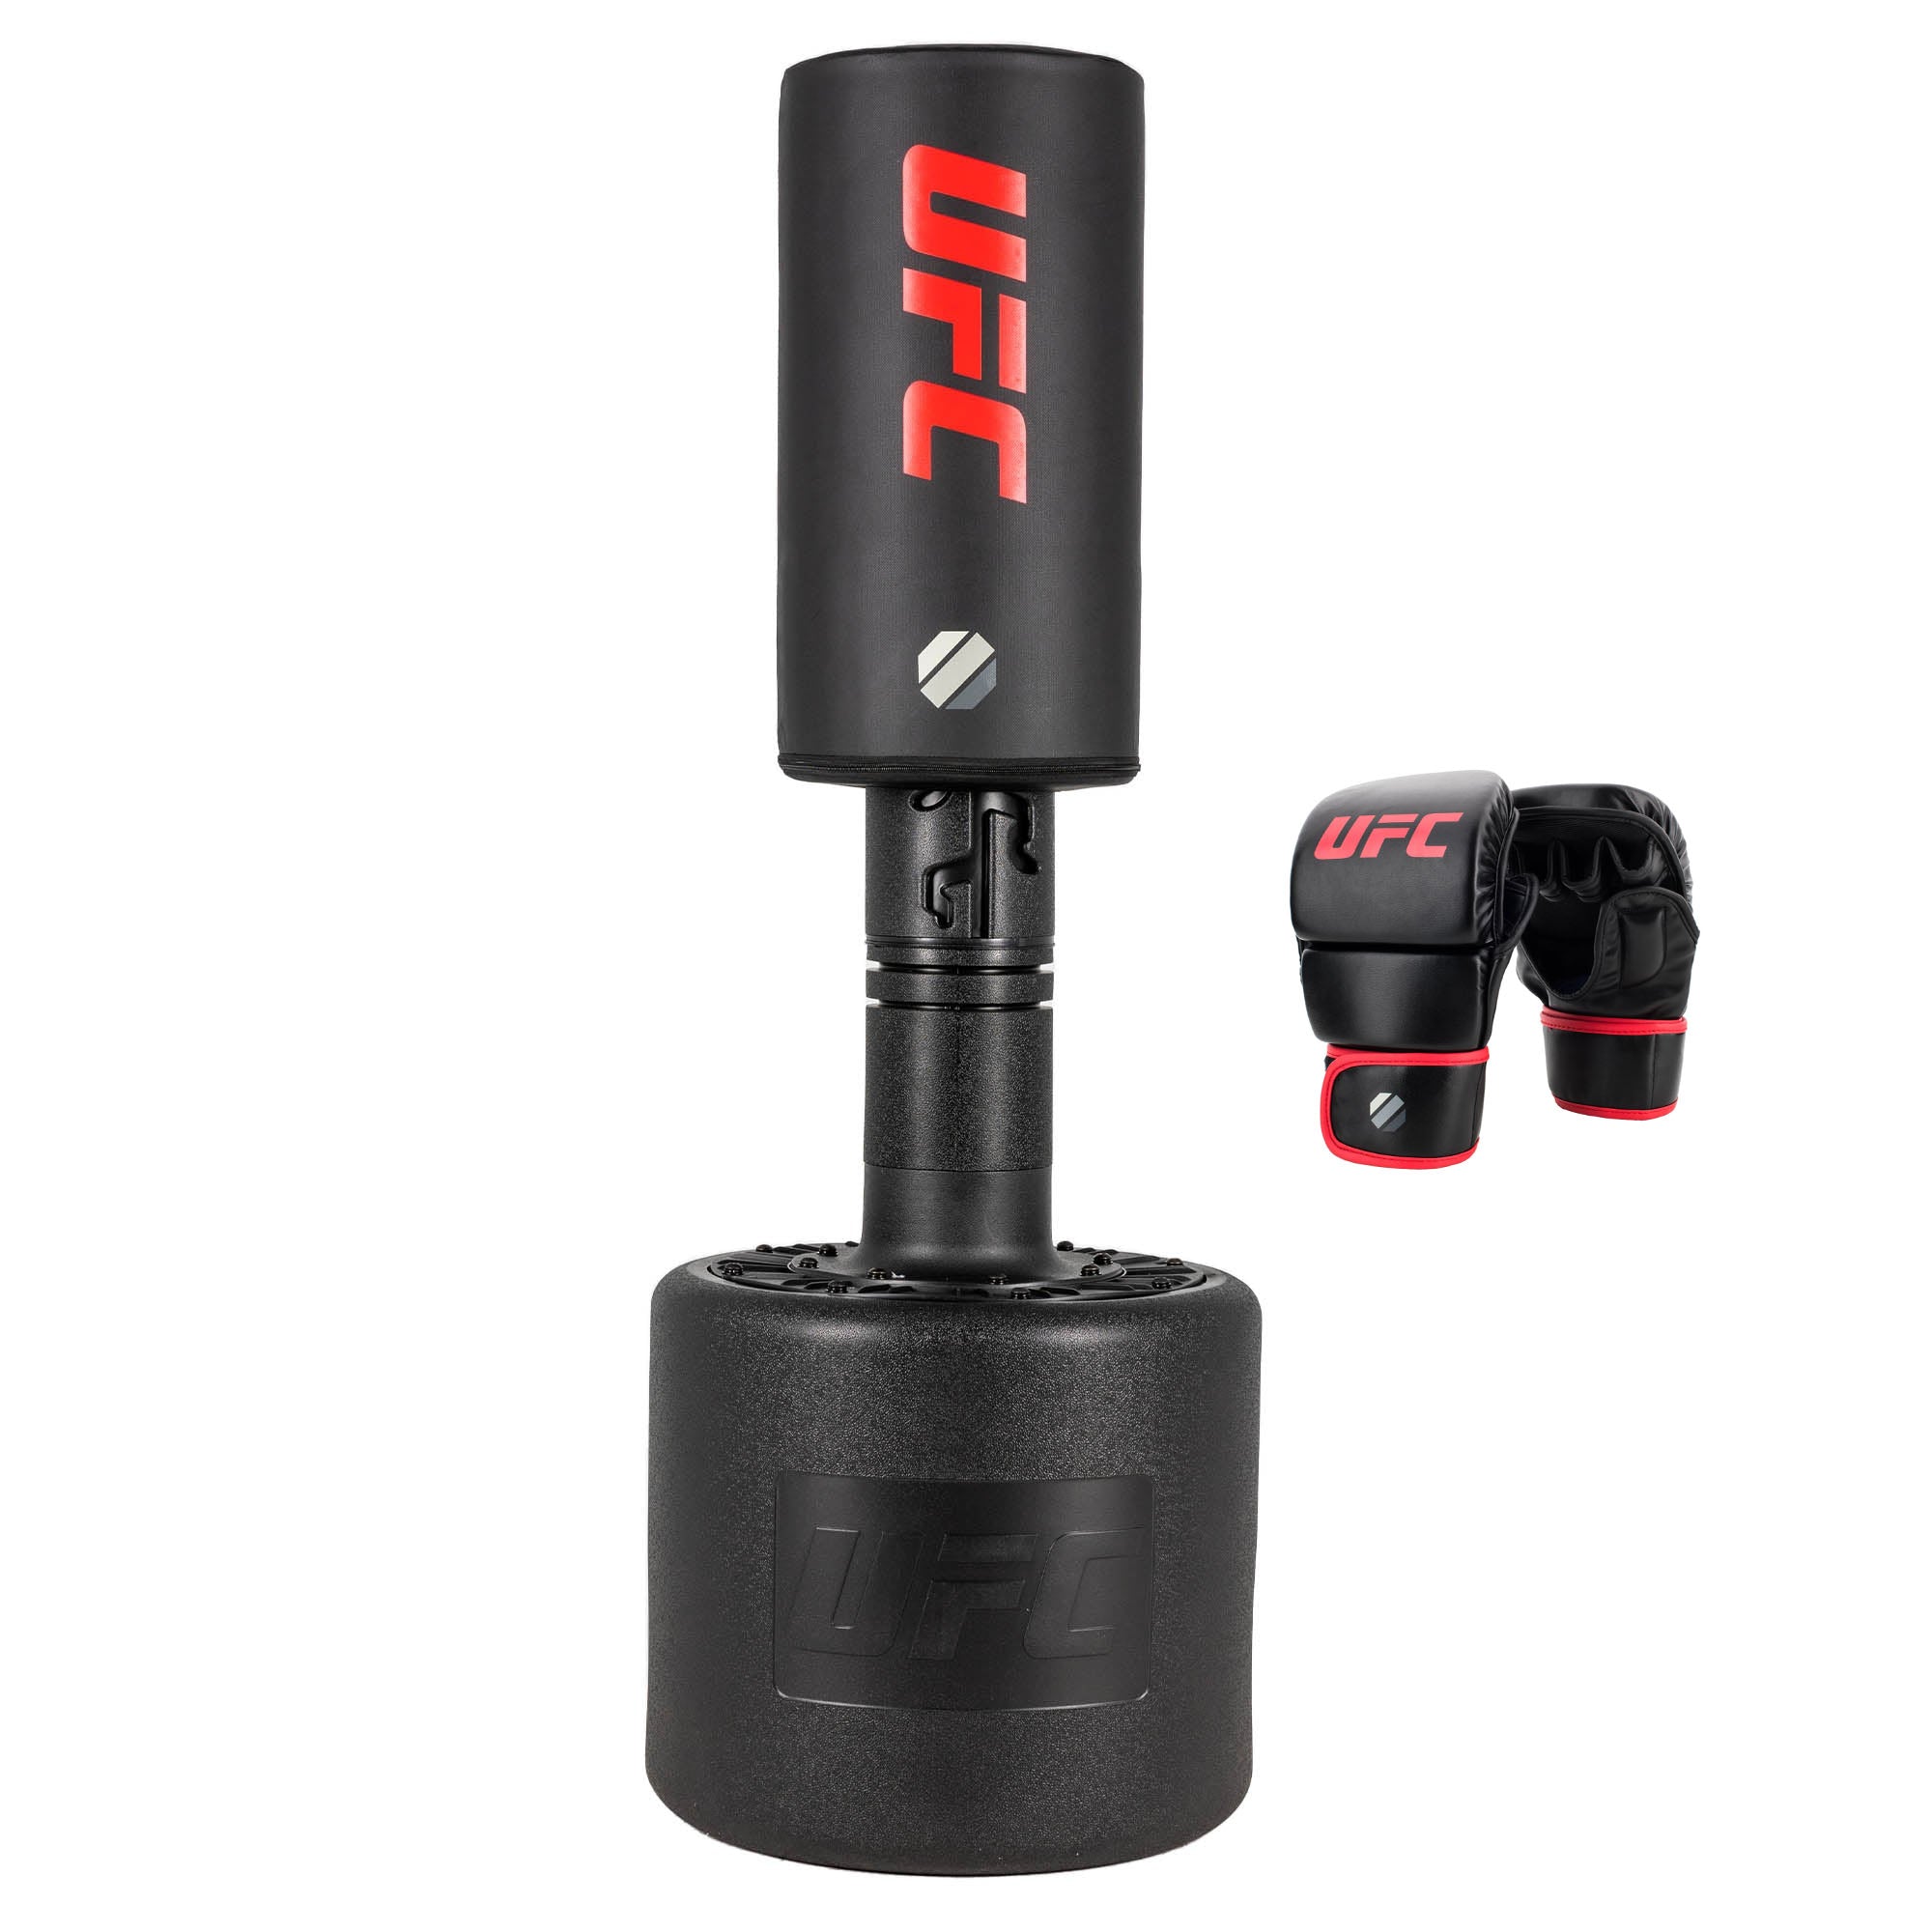 UFC 2ft Free Standing Punch Bag and Glove Set